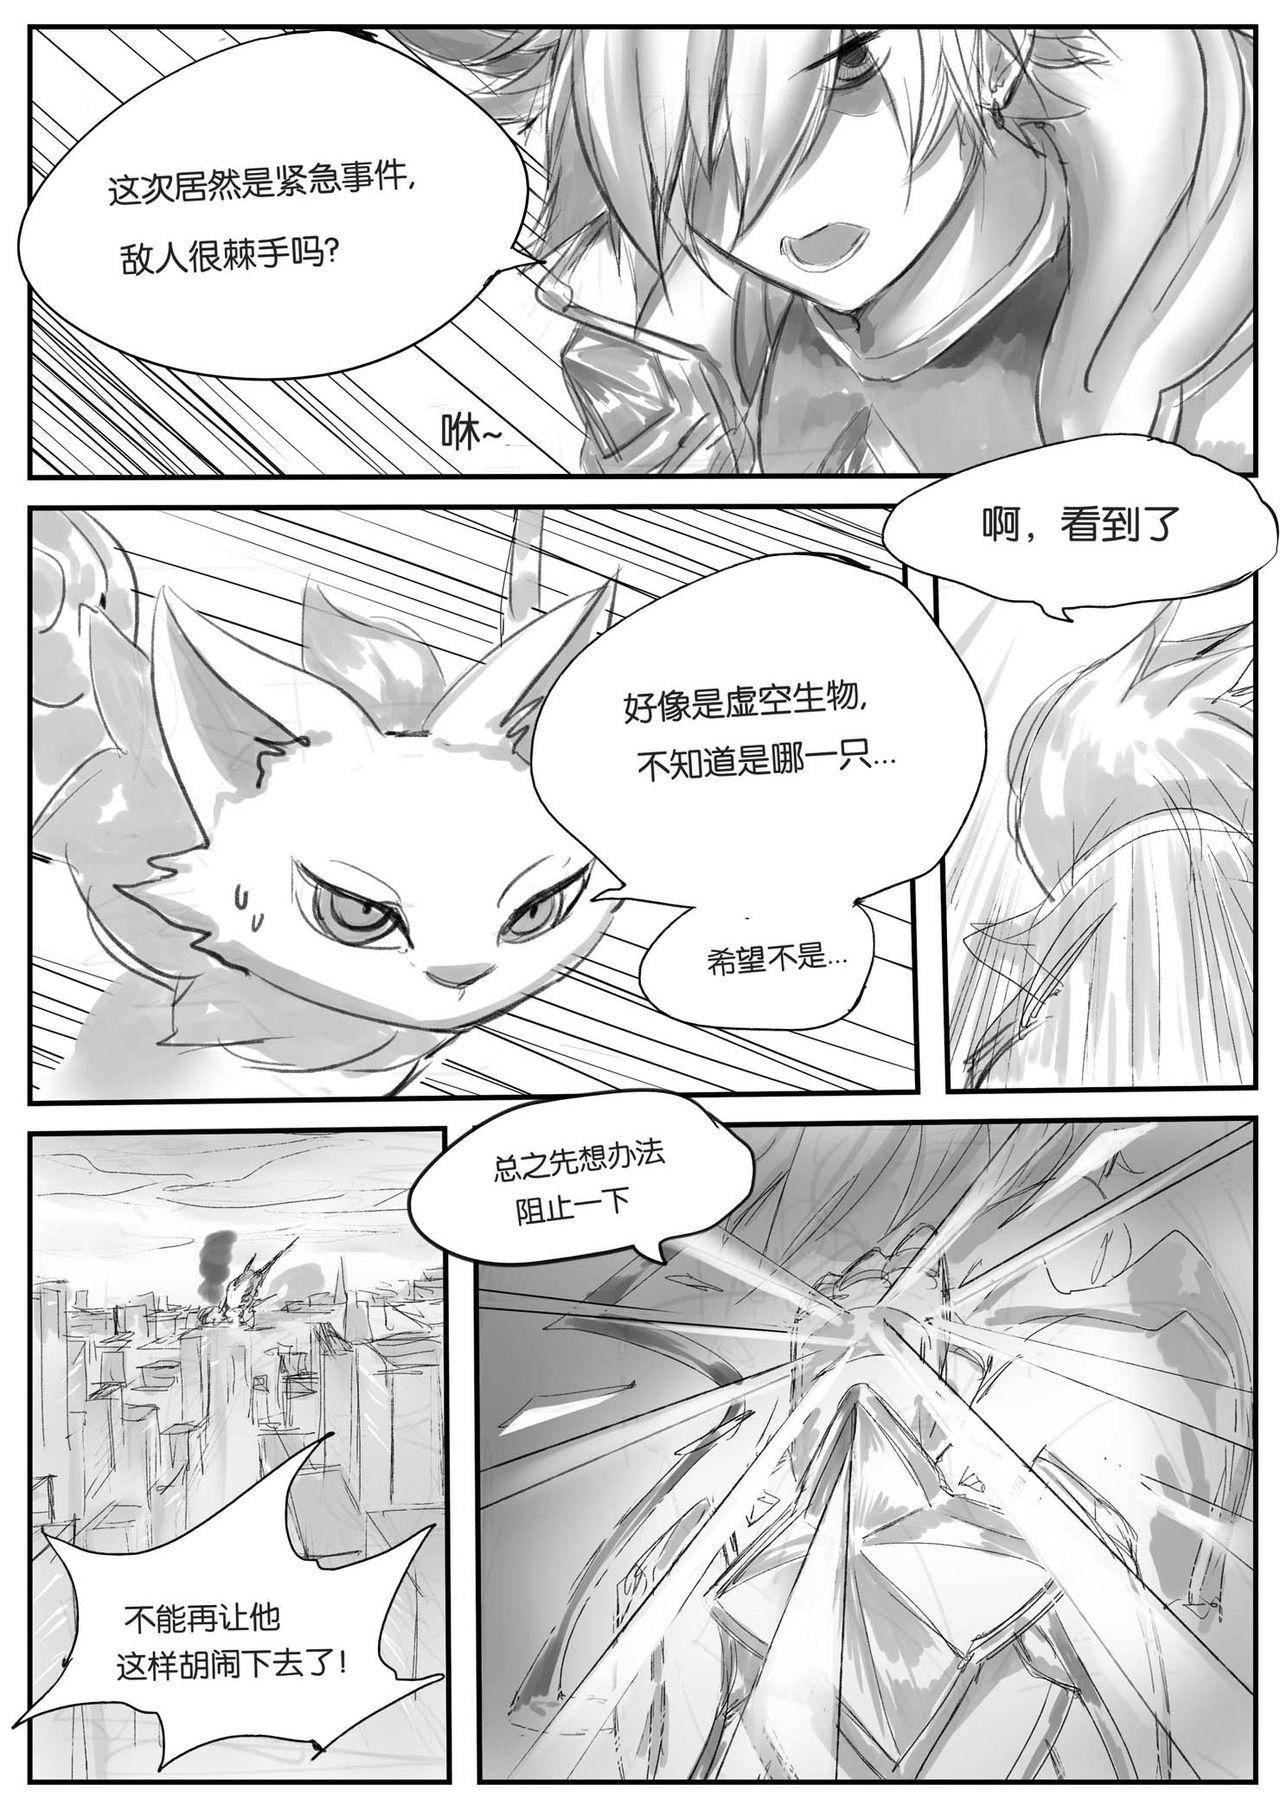 Pigtails 守护者之Xing - League of legends Atm - Page 10